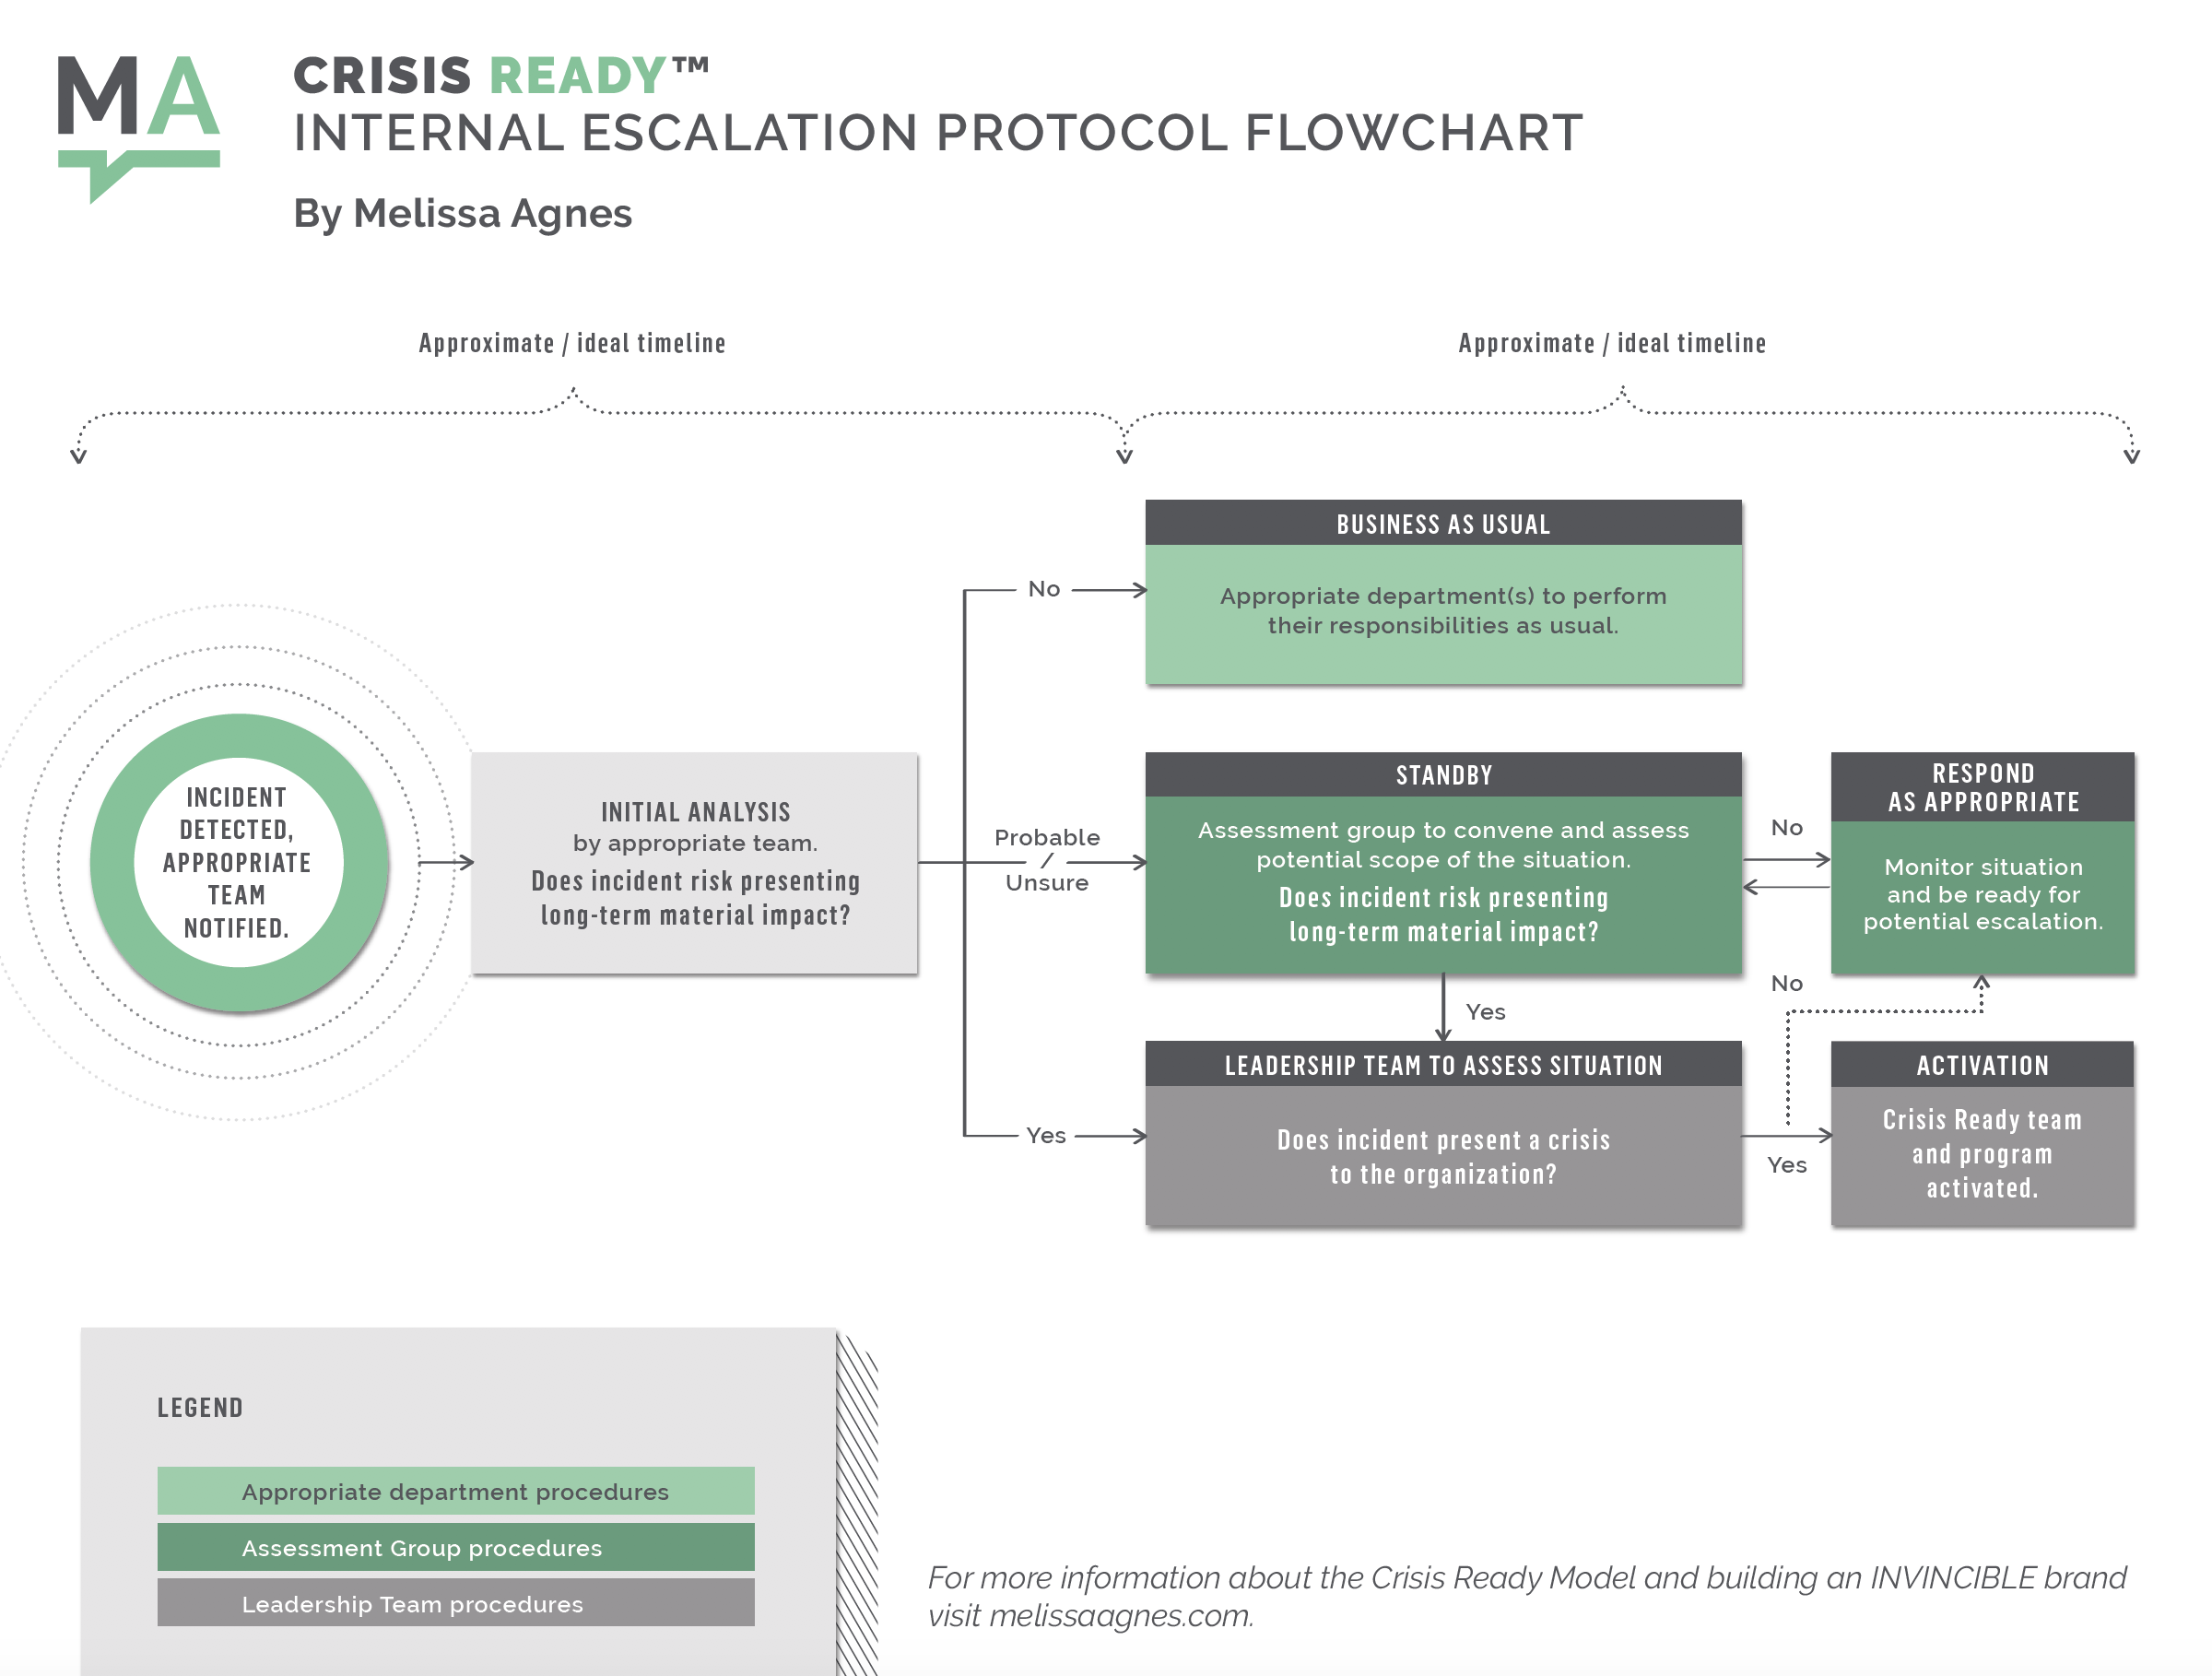 Crisis Ready Internal Escalation Protocol Overview_by Melissa Agnes_2019